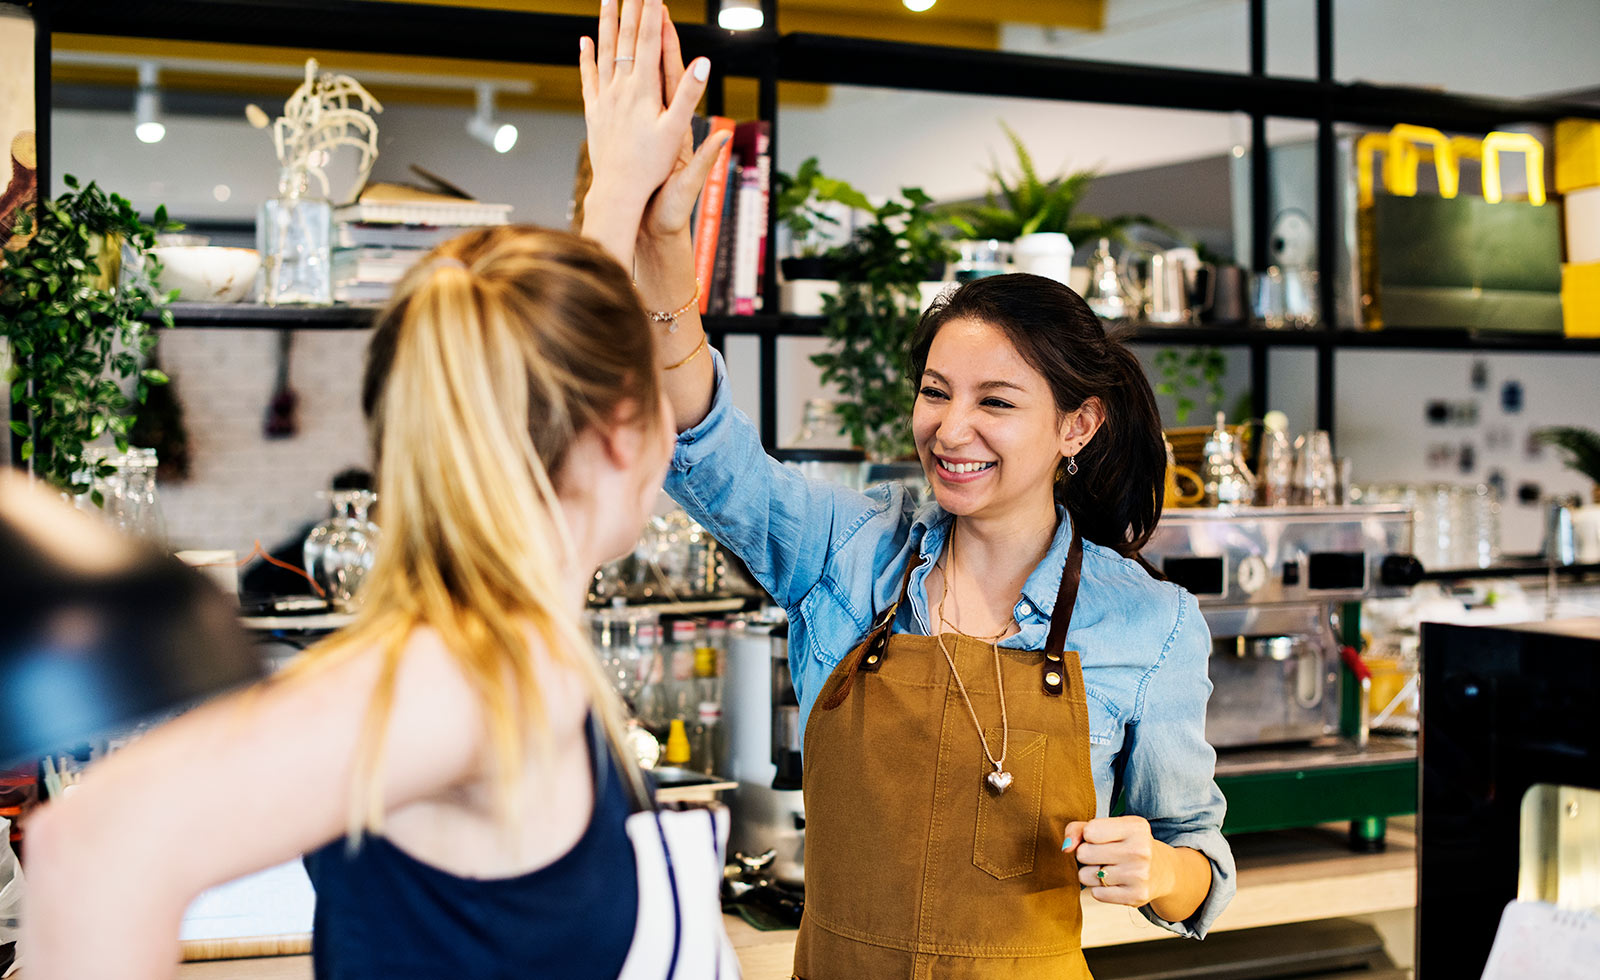 Two women wearing aprons giving each other high five in cafe